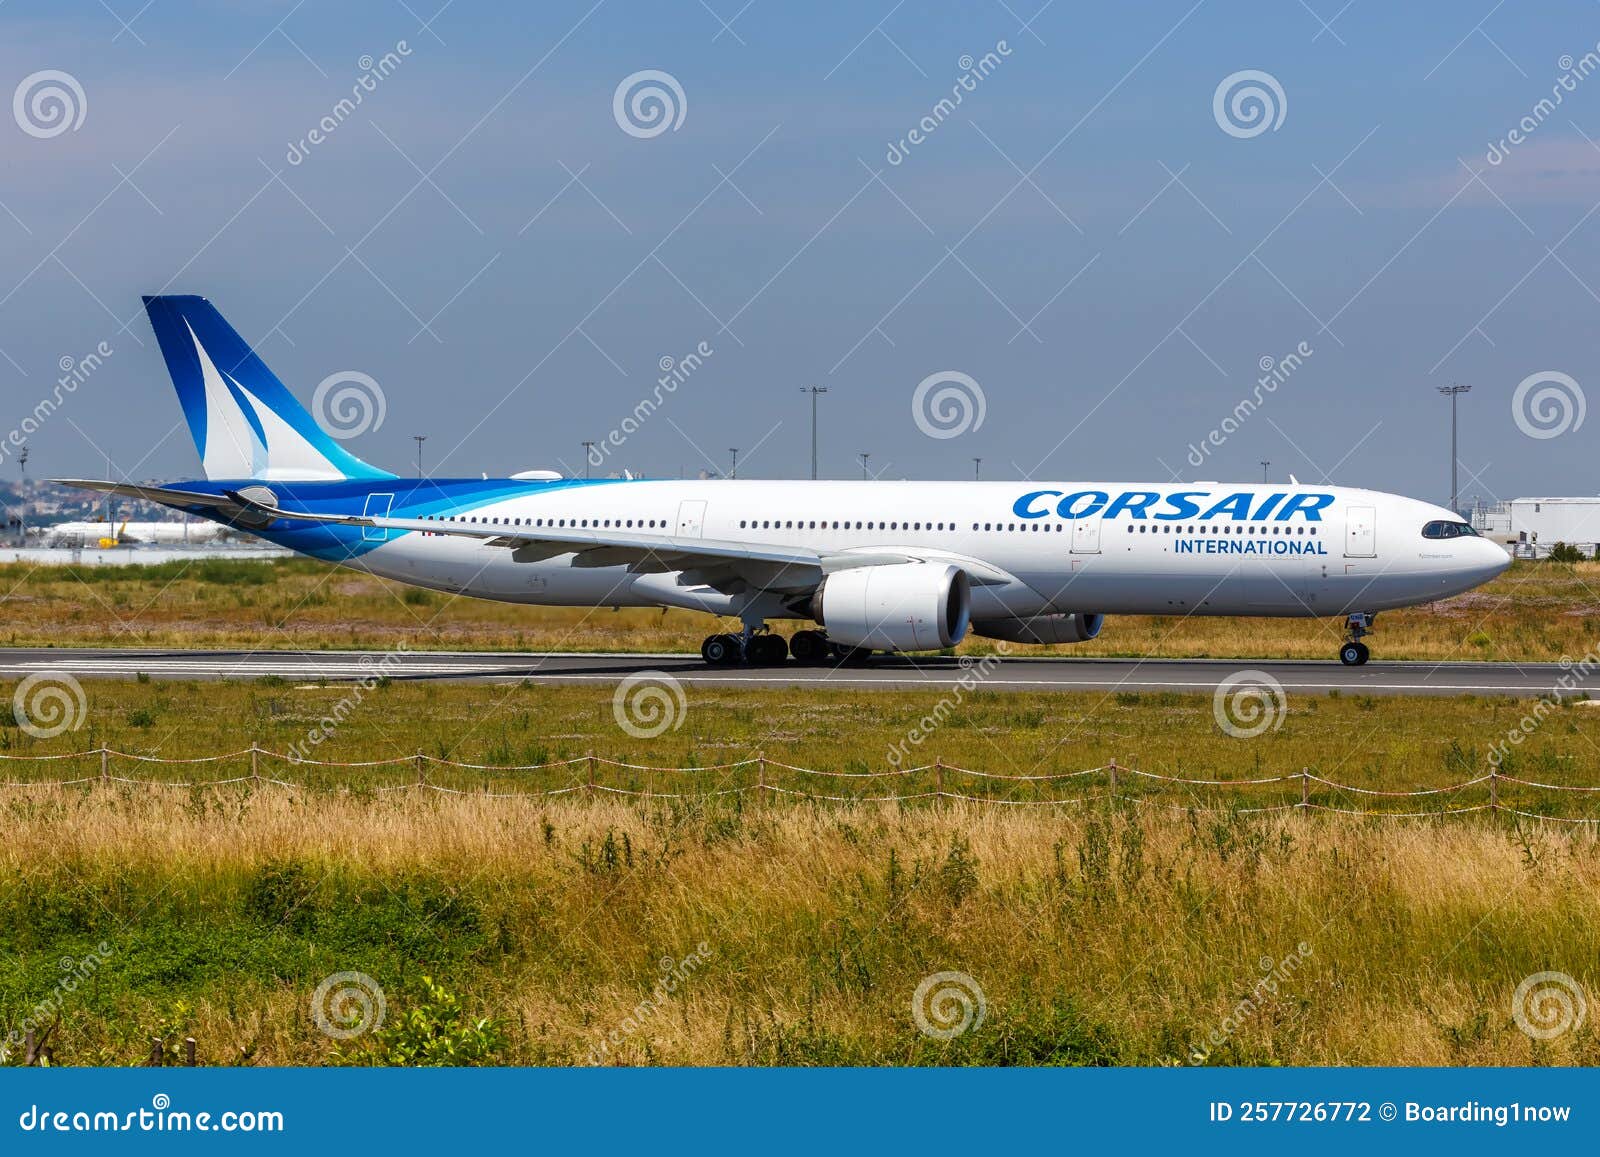 Corsair International Airbus A330-900neo Airplane Paris Orly Airport in France Photography - Image of france, transportation: 257726772